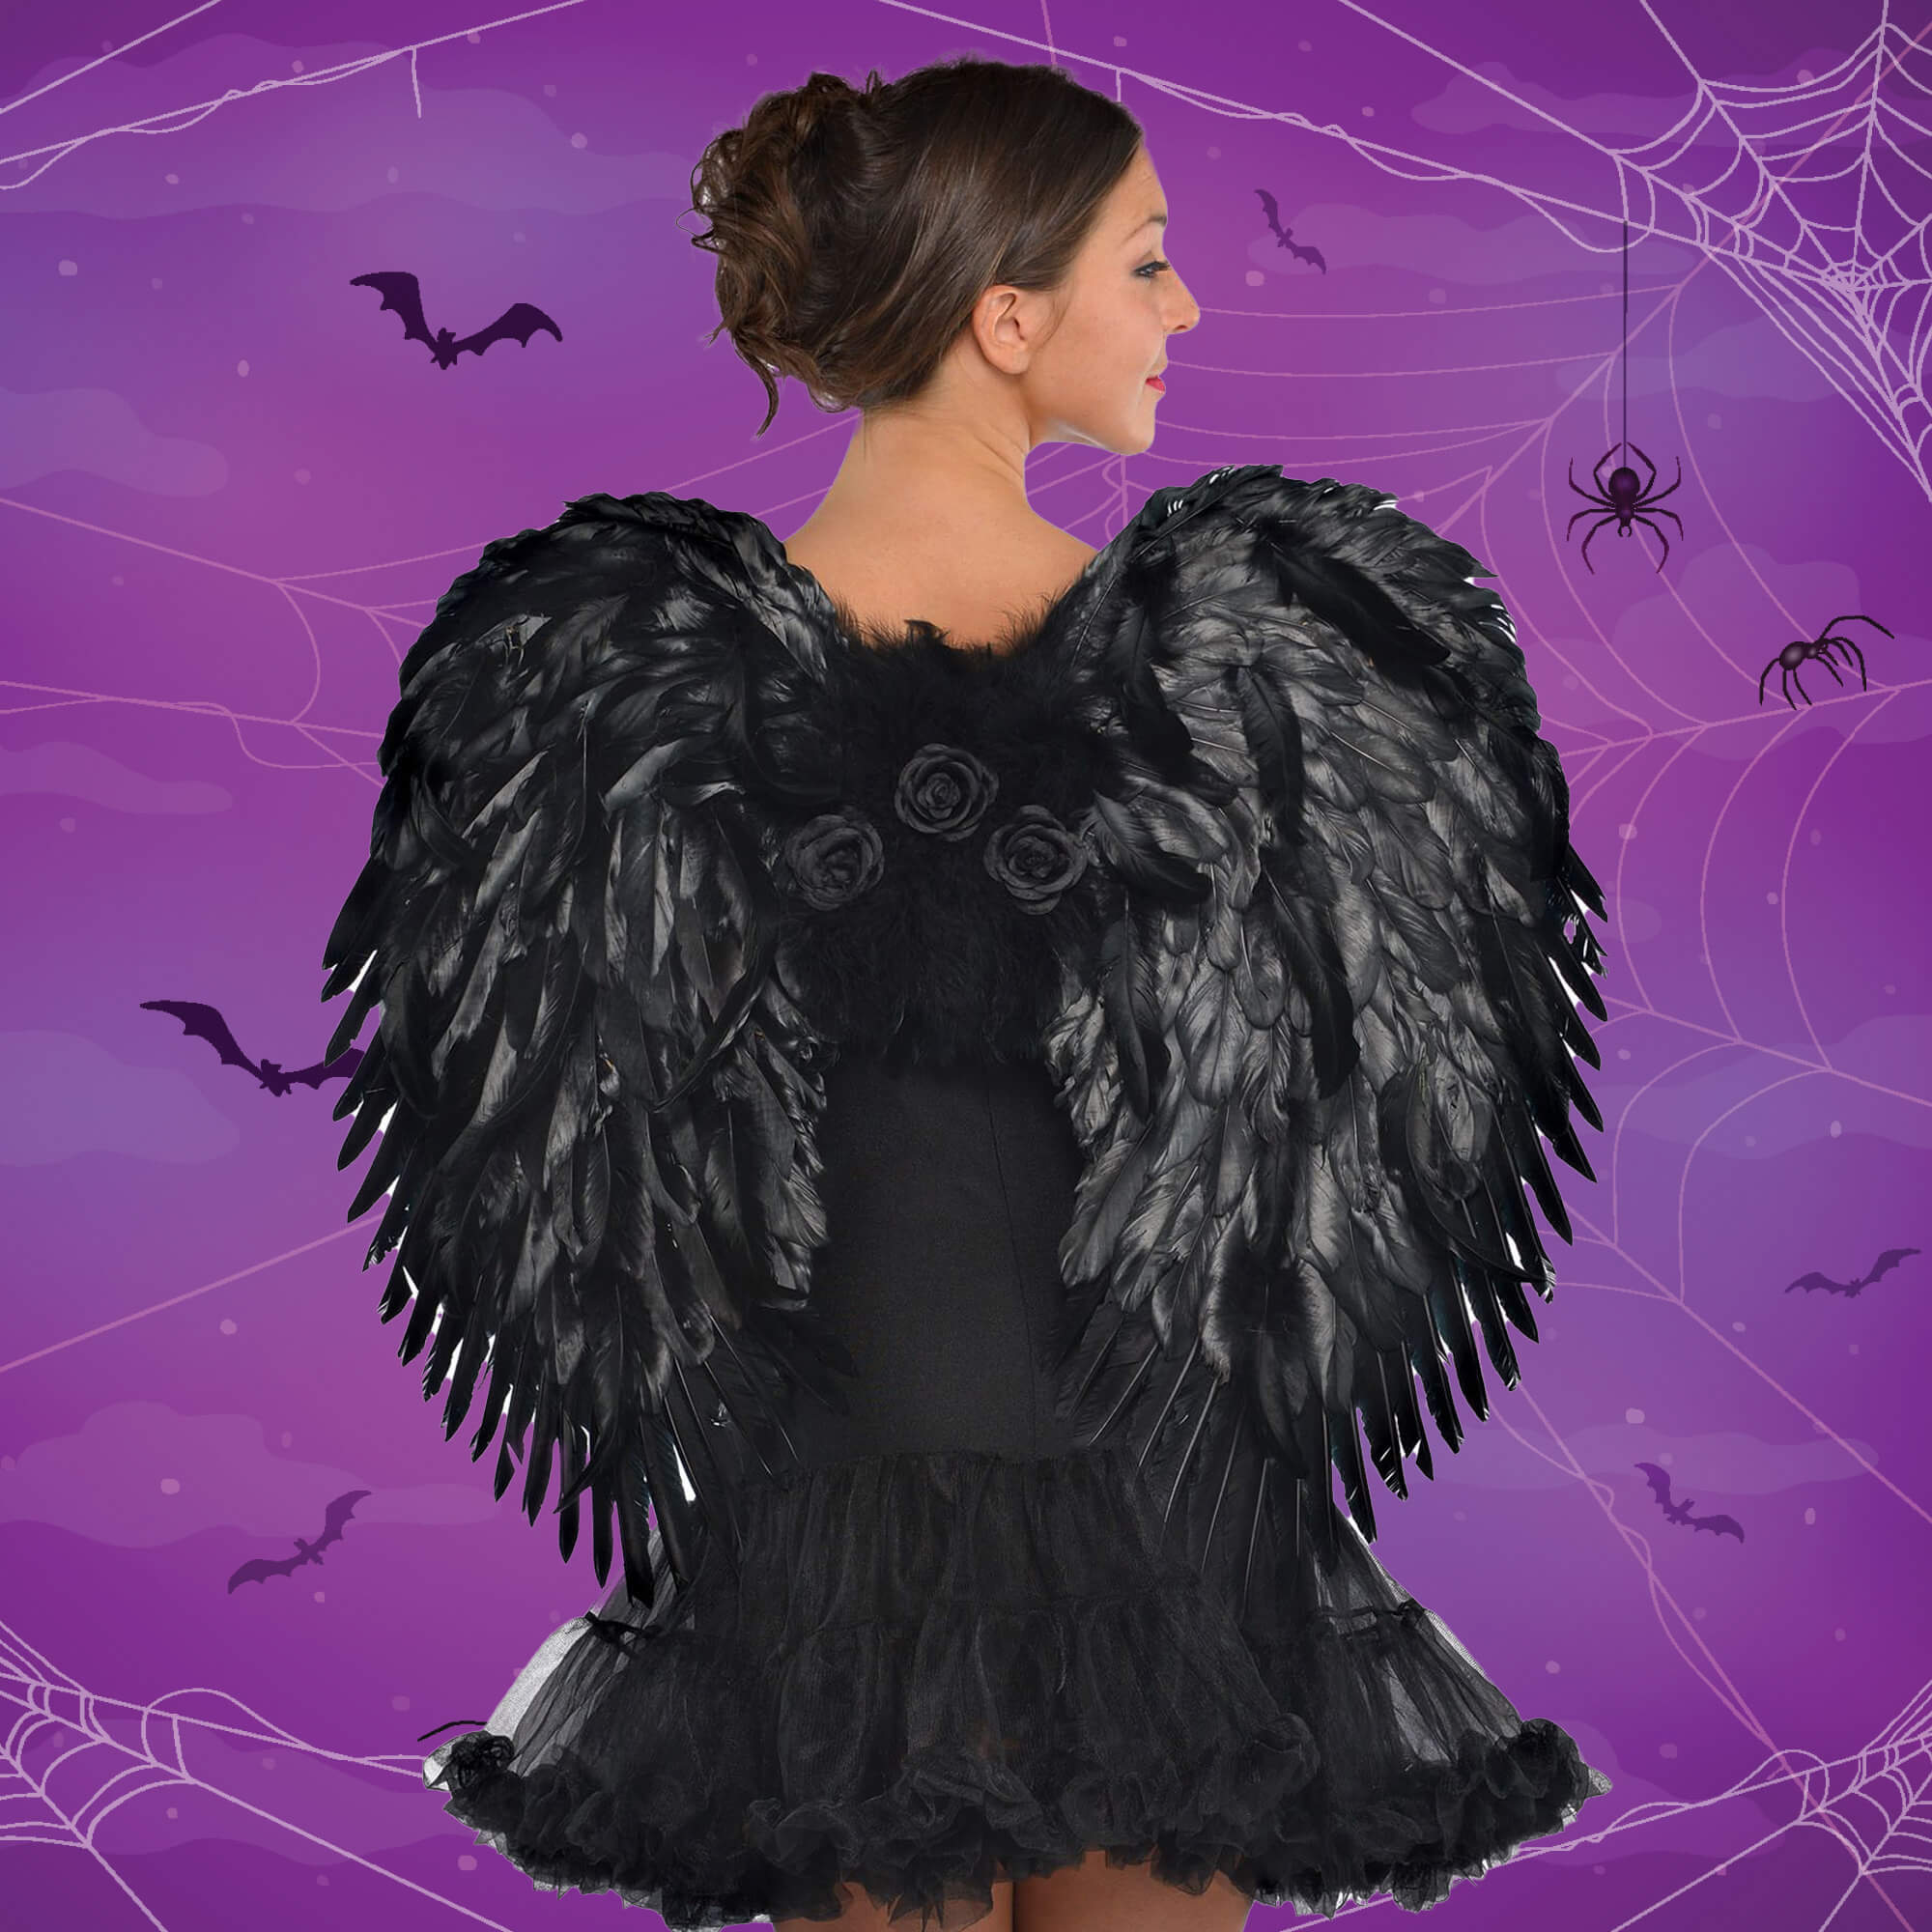 Black wings on back of woman for halloween costume